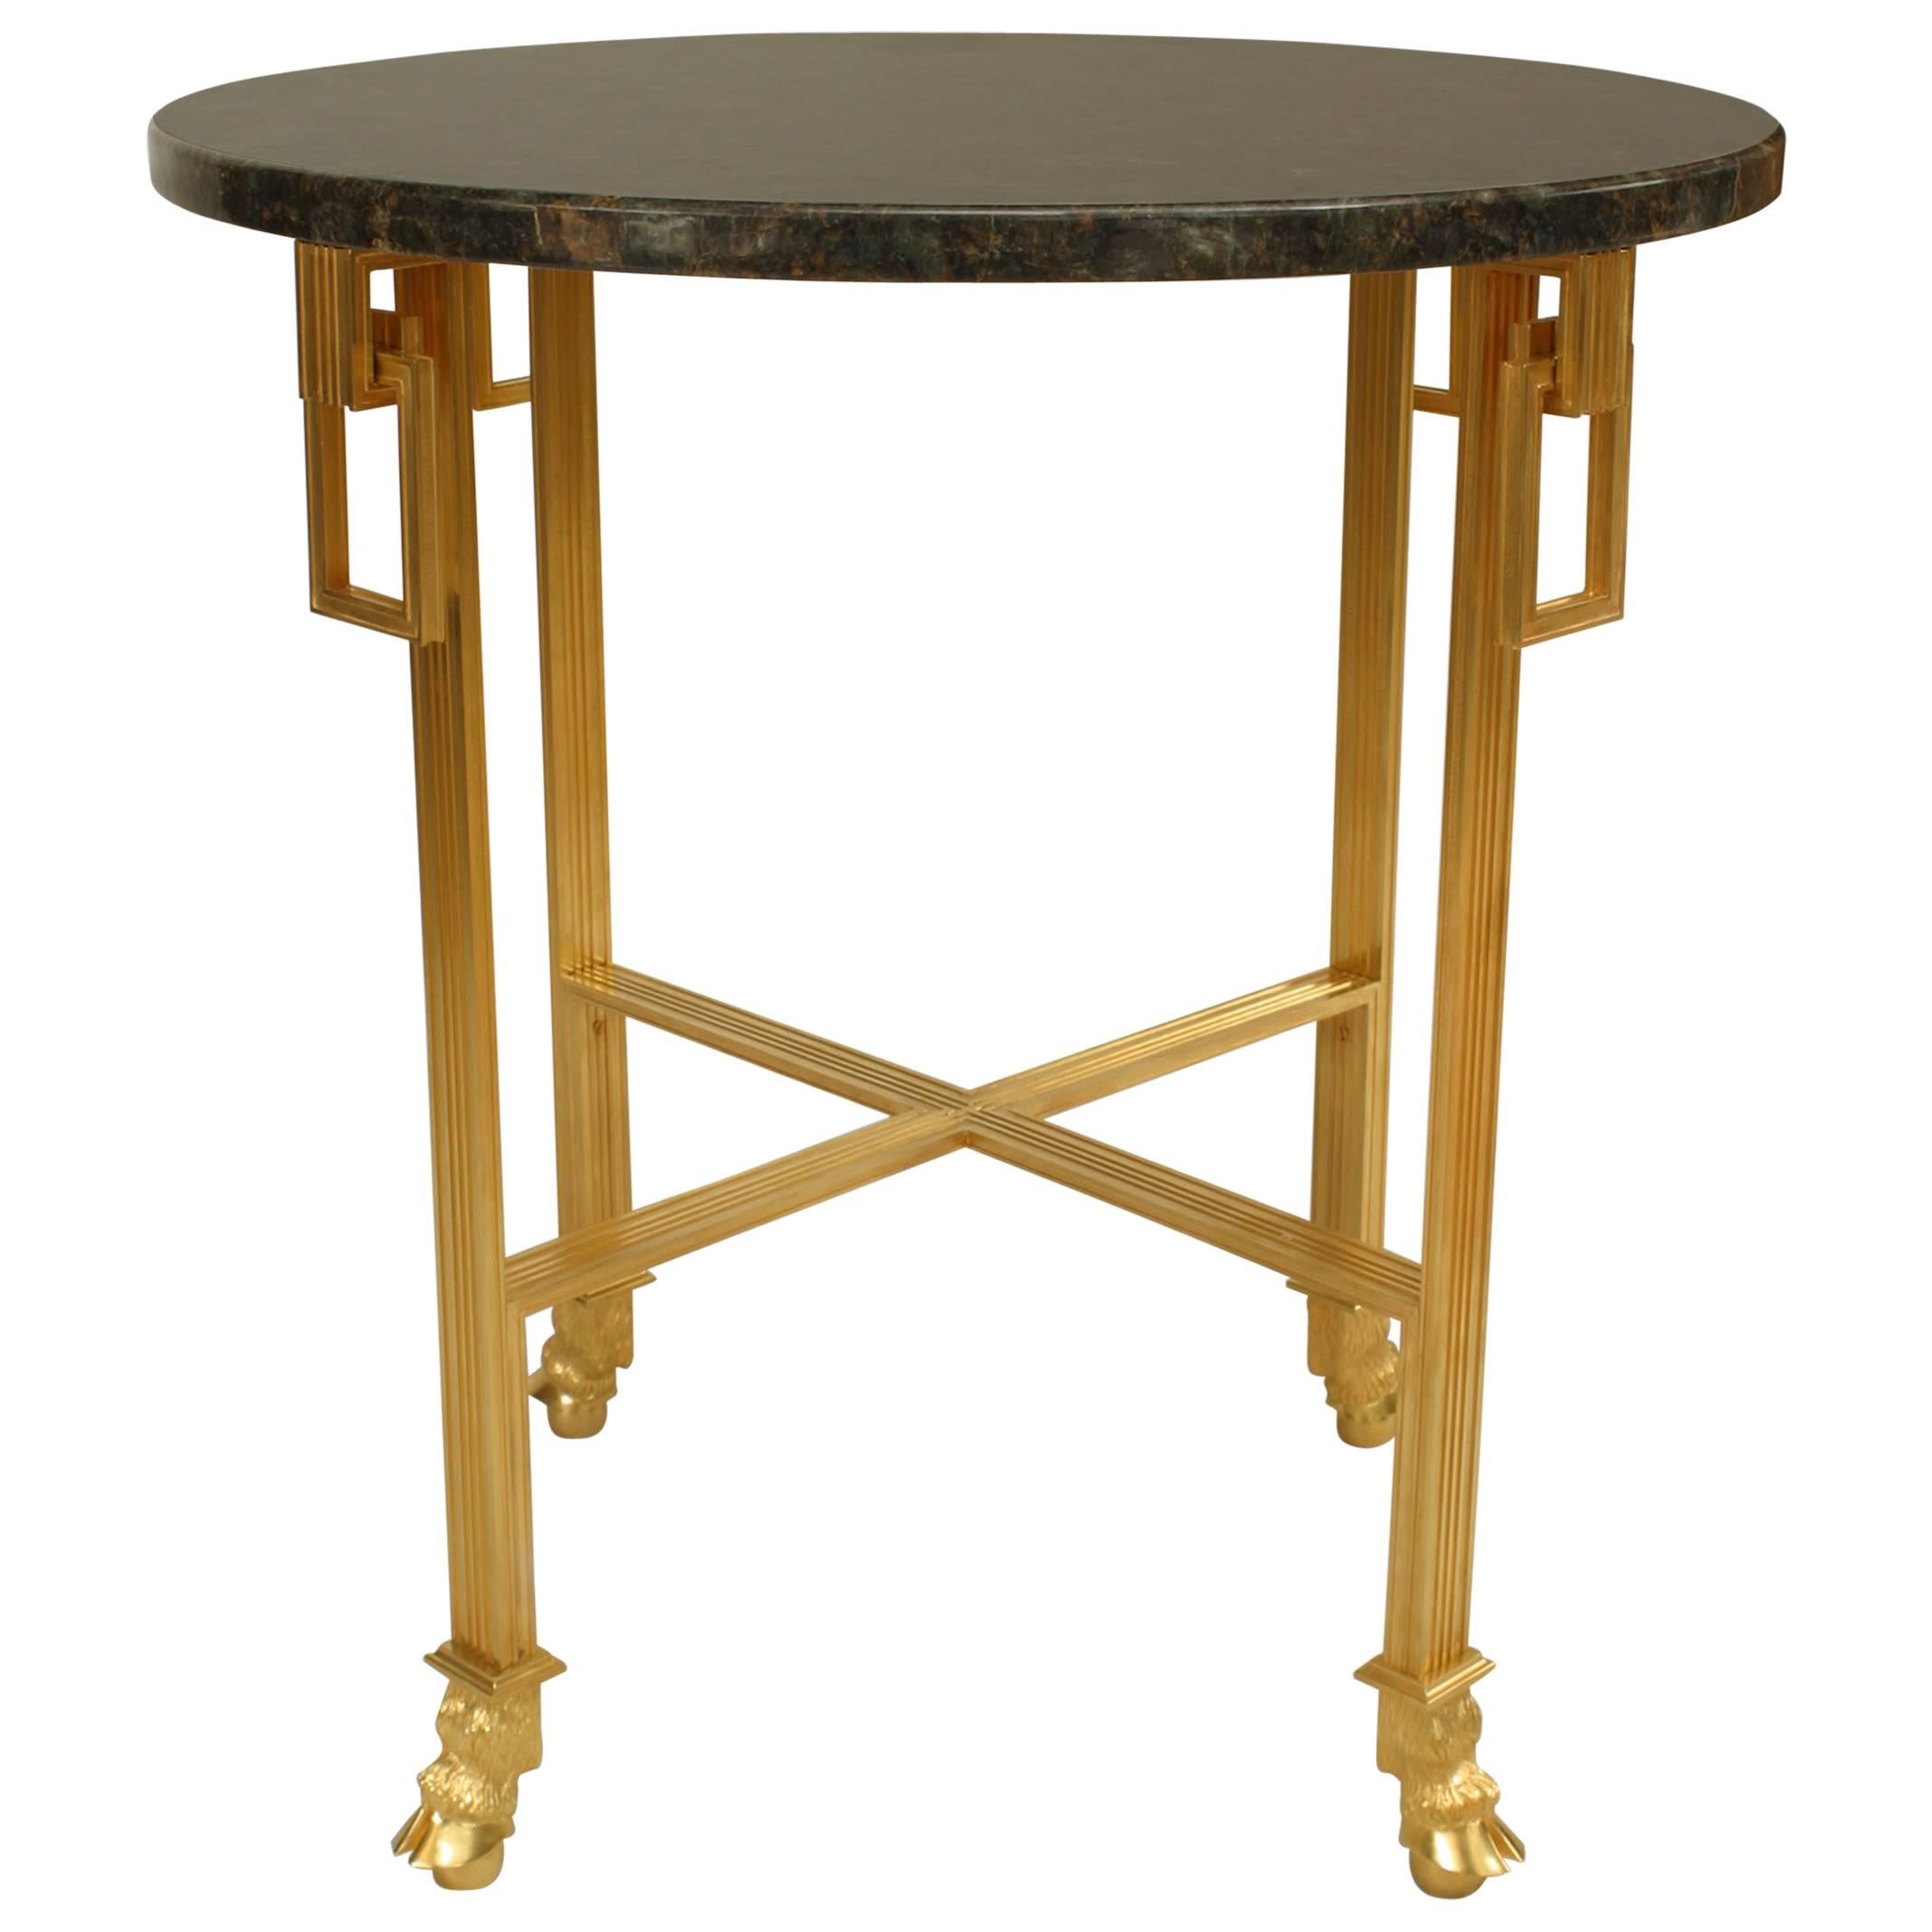 French Louis Xvi Style Mahogany And Marble End Table For Sale At 1stdibs